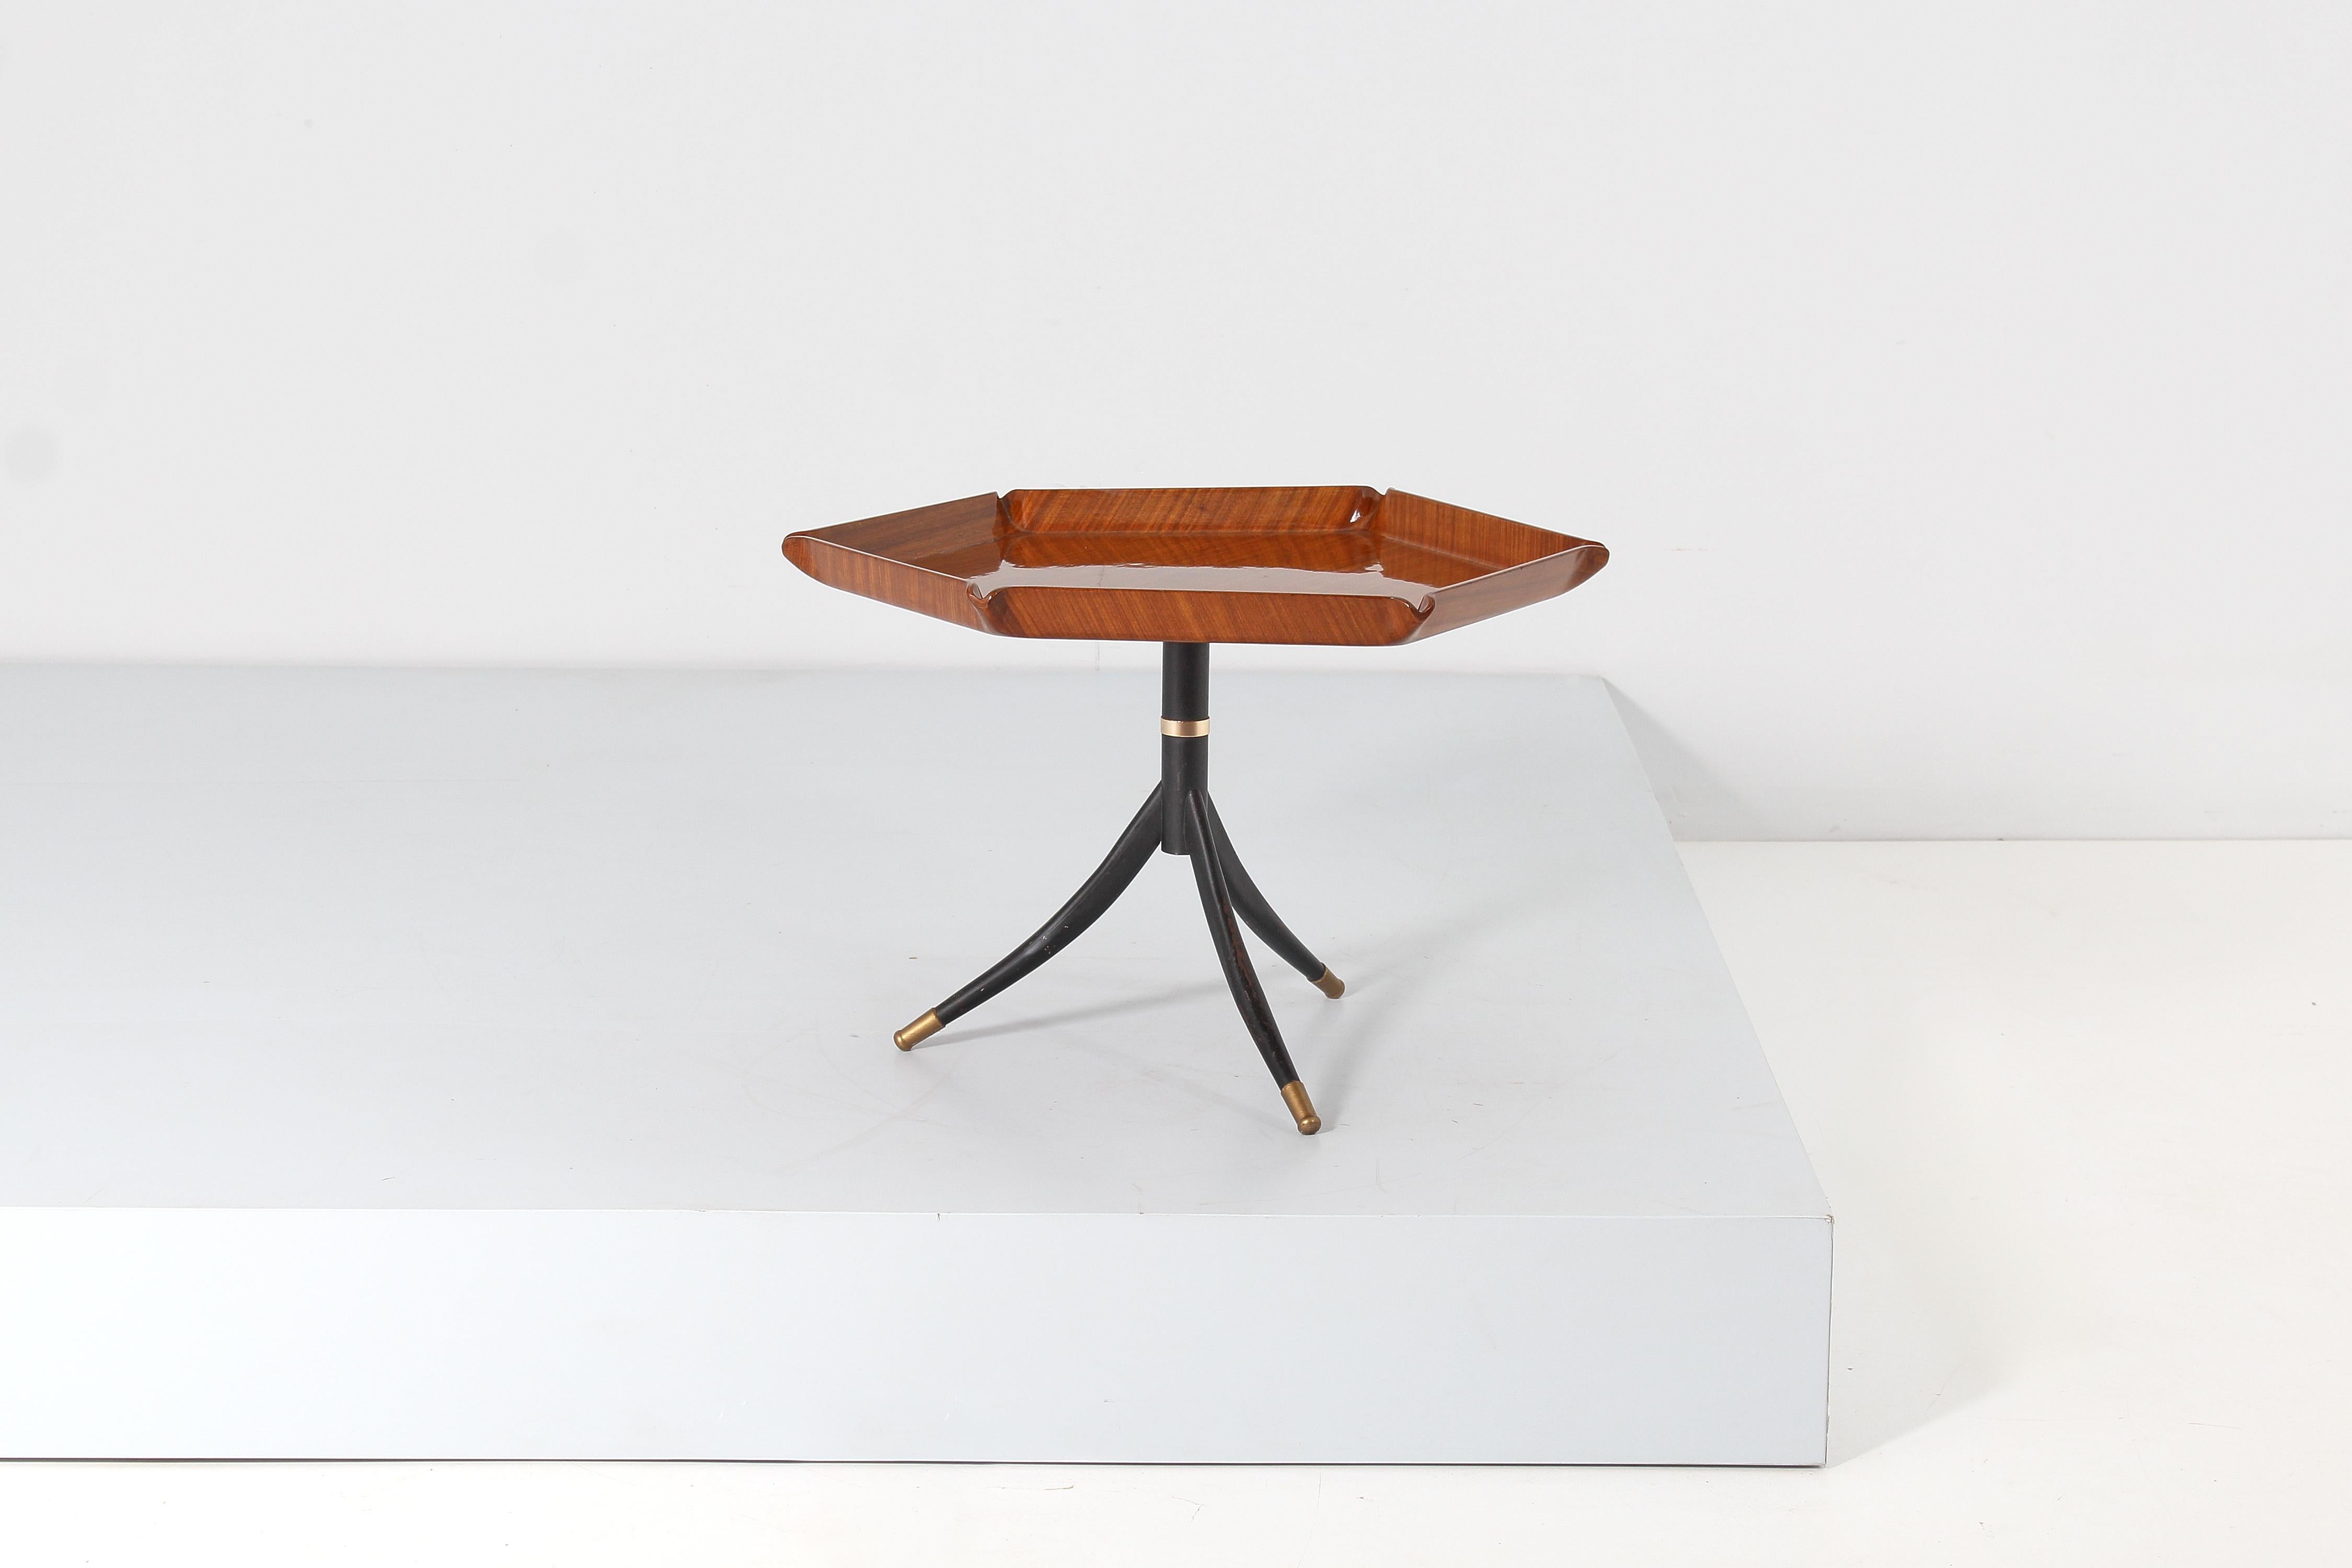 Very original wooden coffee table with hexagonal top in curved plywood supported by three metal saber legs with brass tips. The table, restored, is attributable to Osvaldo Borsani, Italy in the 1950s.
Some irregularities of the symmetry are visible.